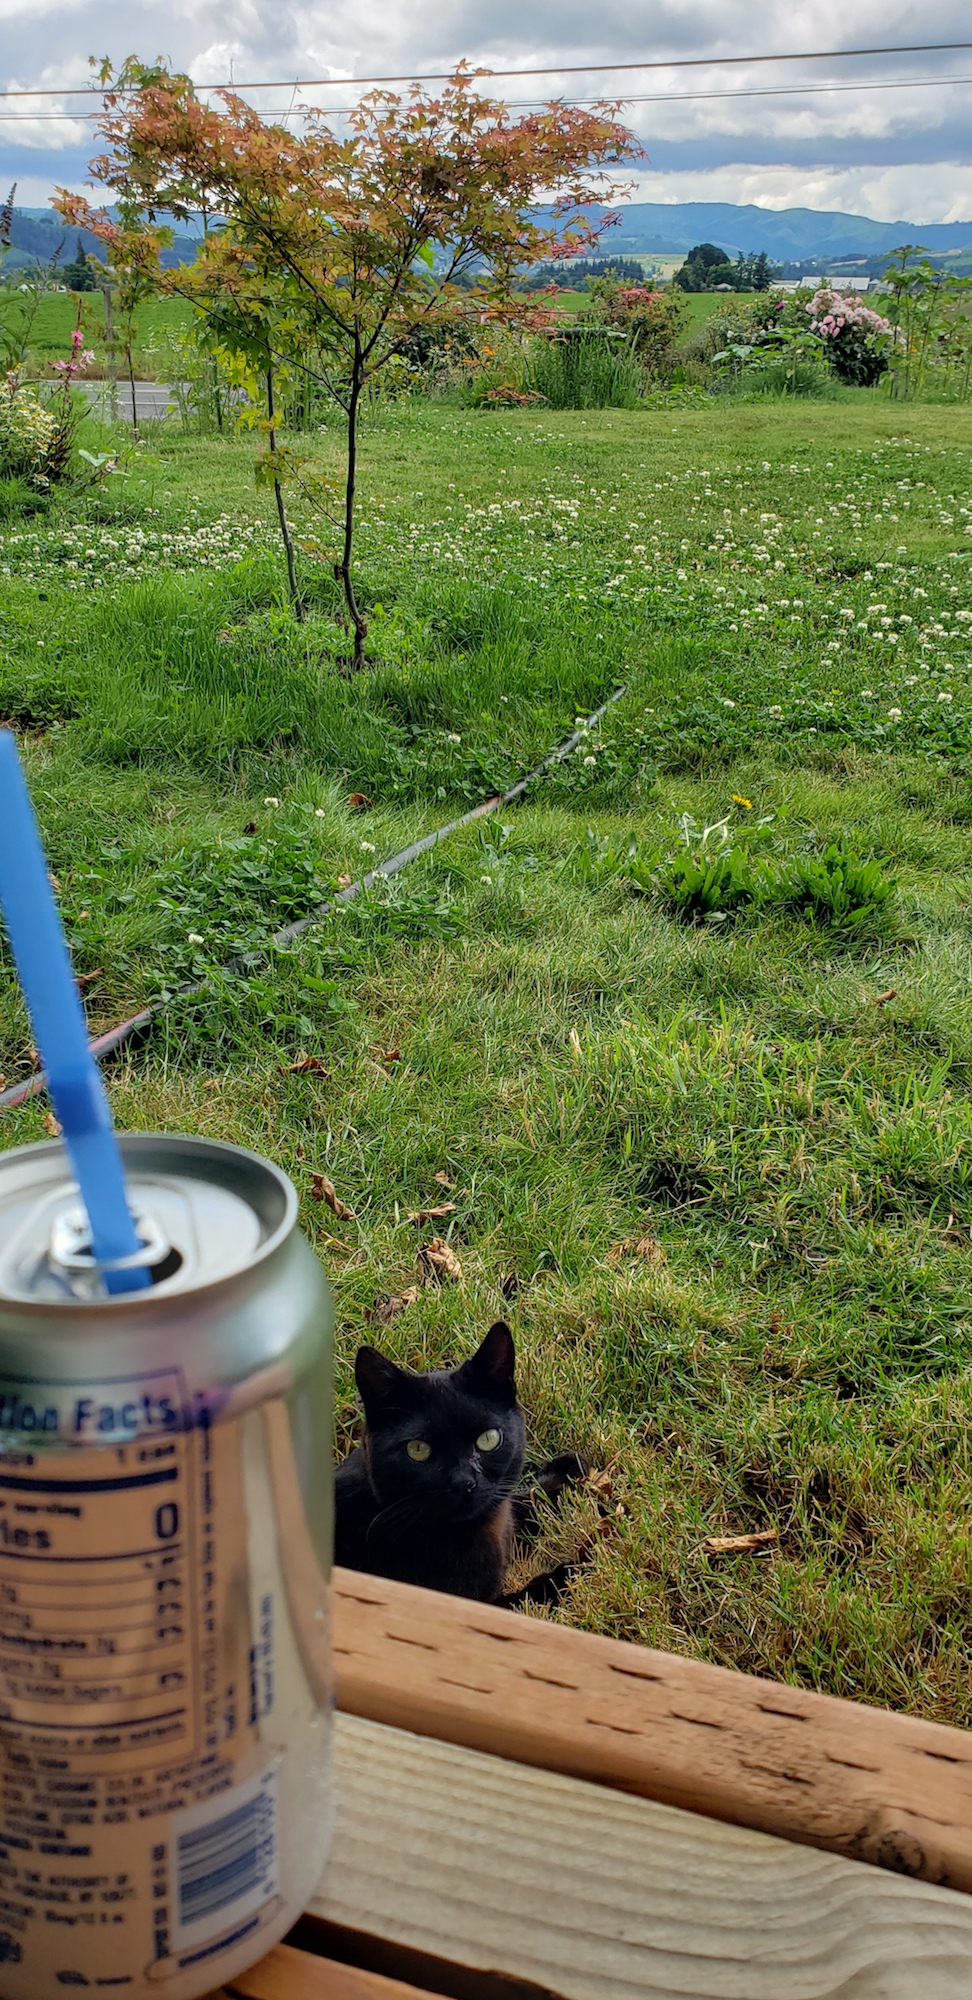 black cat looking at camera beyond soda can on garden bench